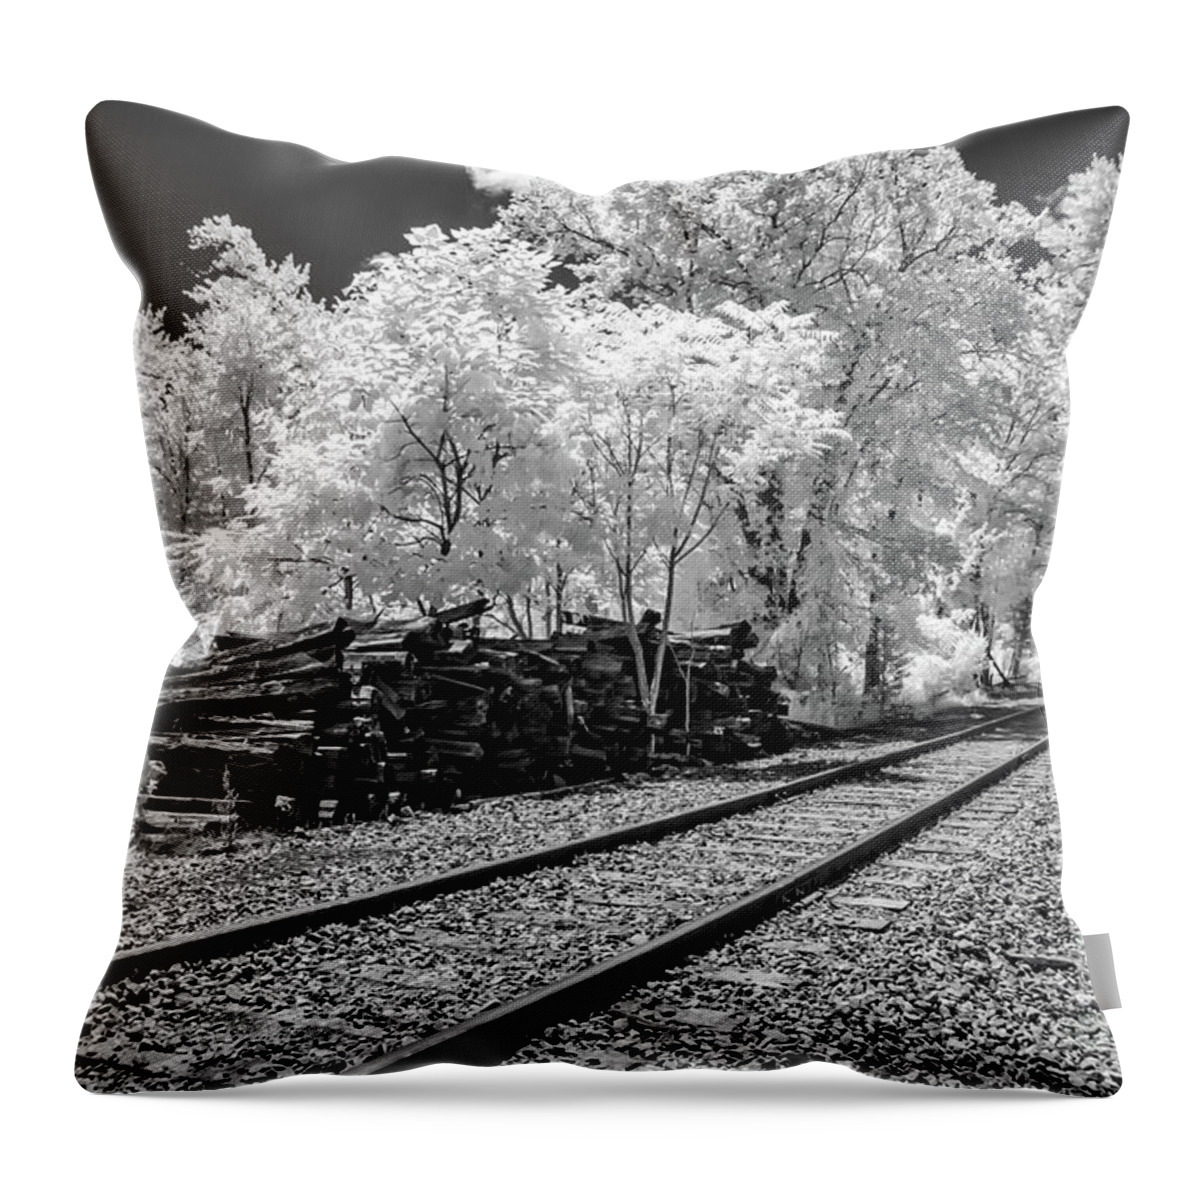 Anthony Sacco Throw Pillow featuring the photograph Railroad Tracks BW by Anthony Sacco